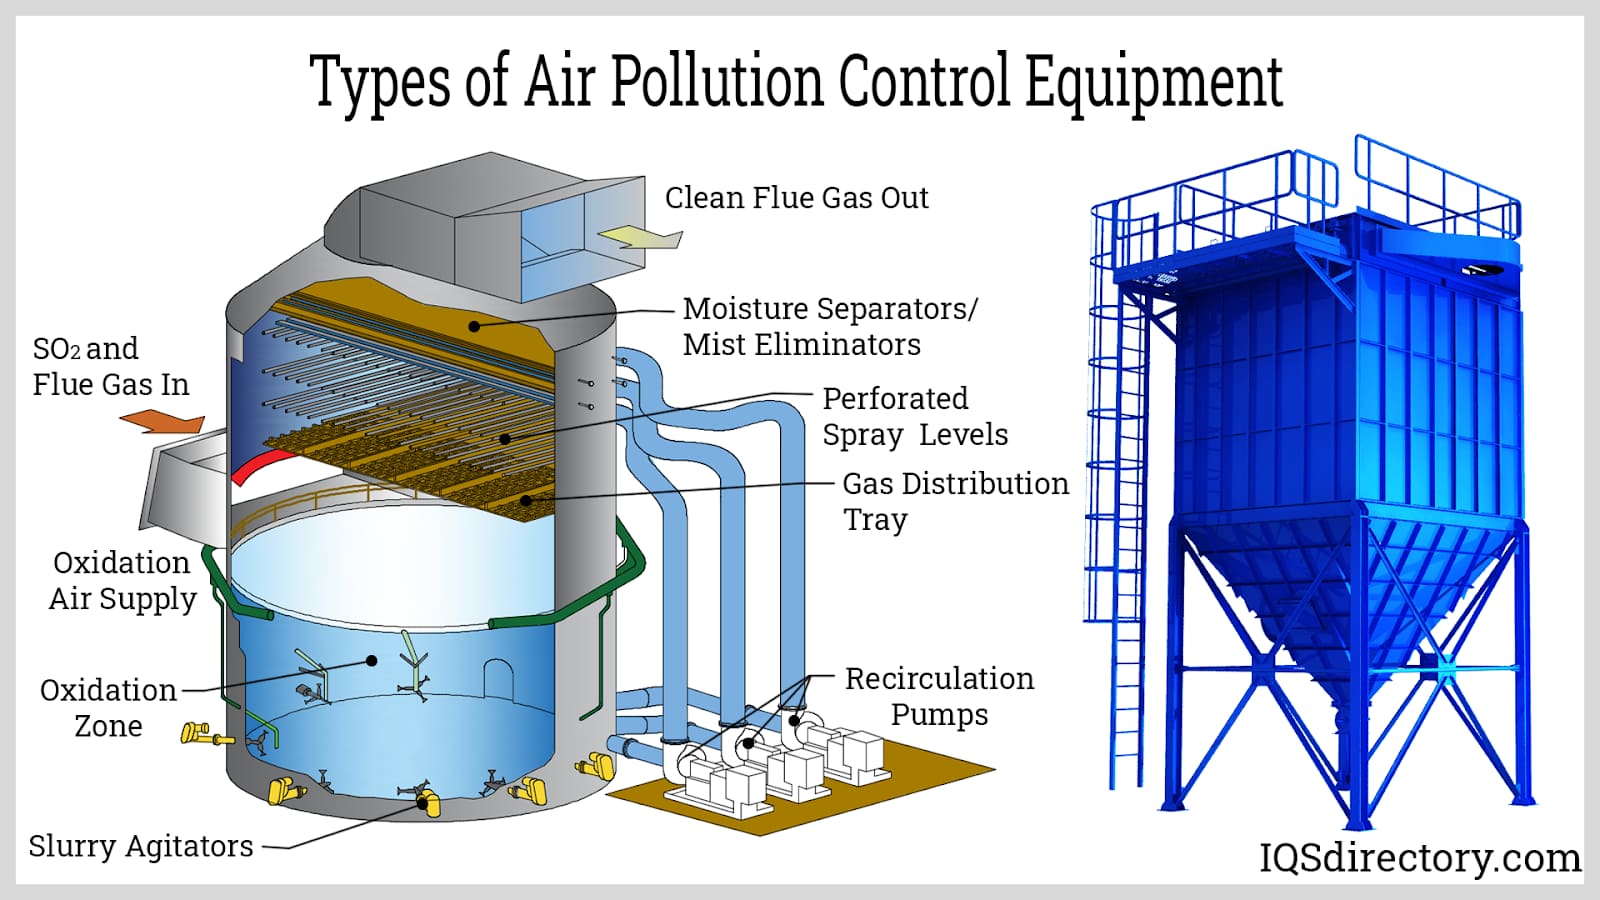 Types of Air Pollution Control Equipment